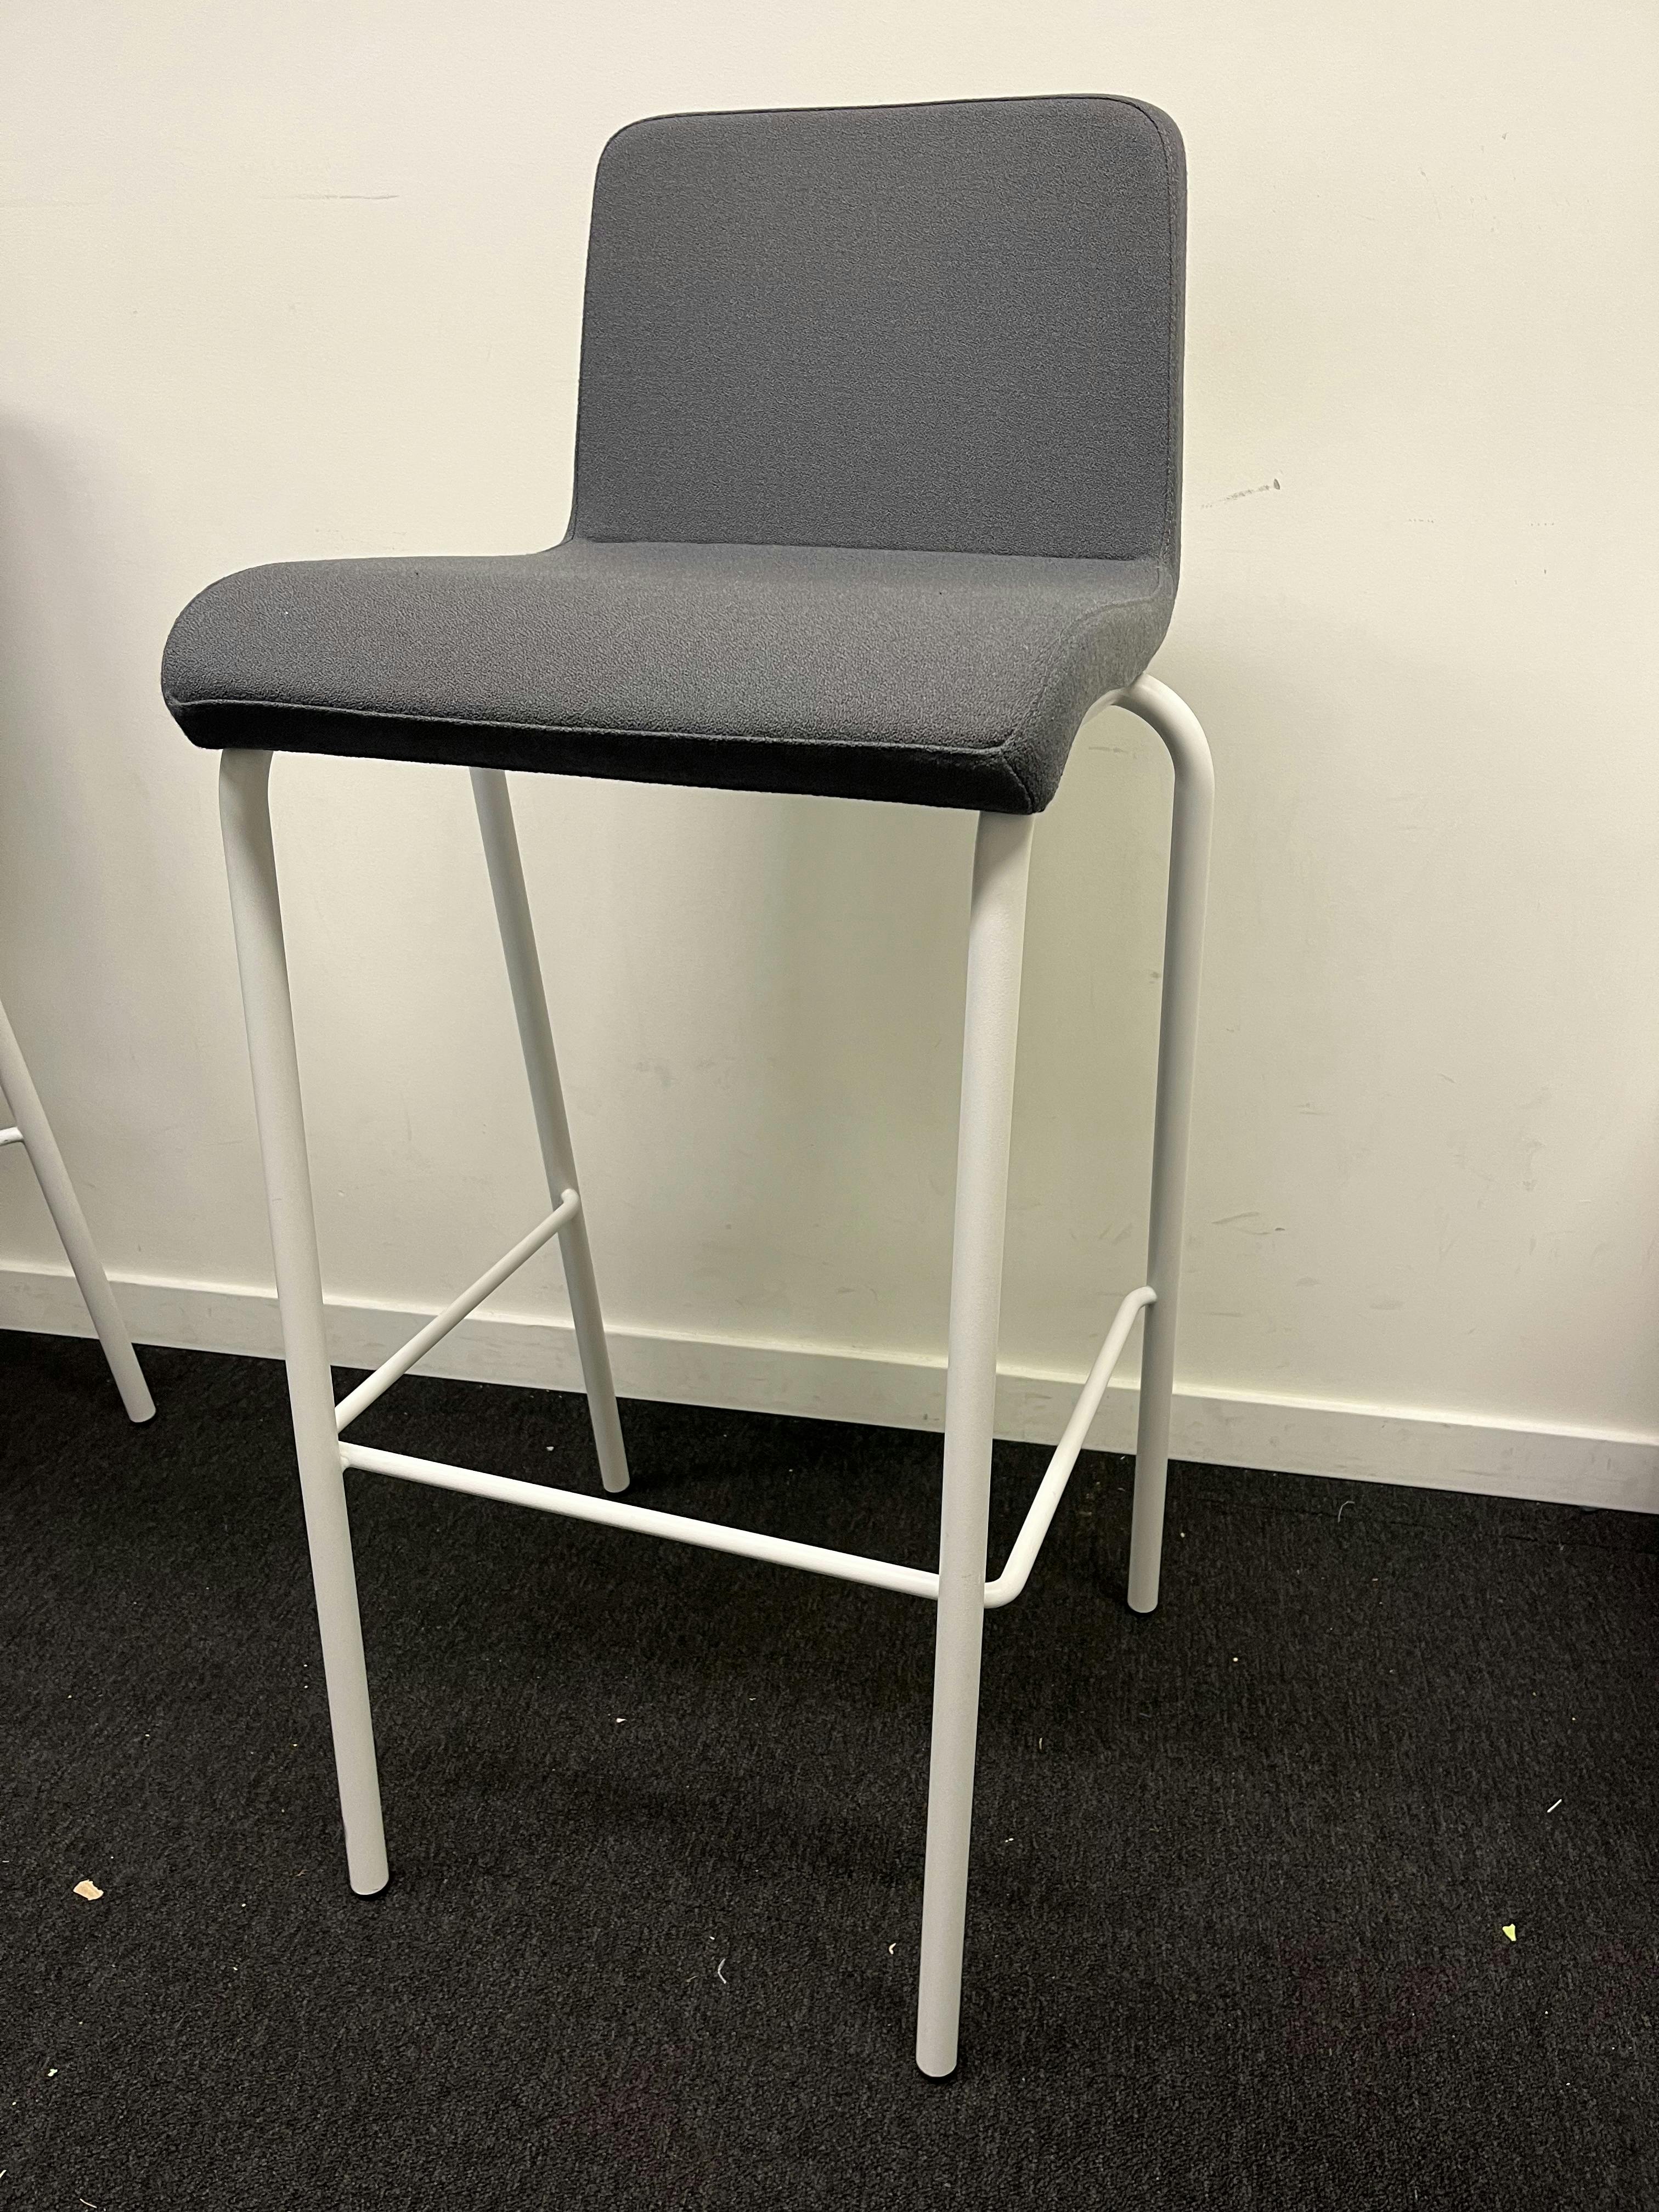 Grey high chair on white legs - Relieve Furniture